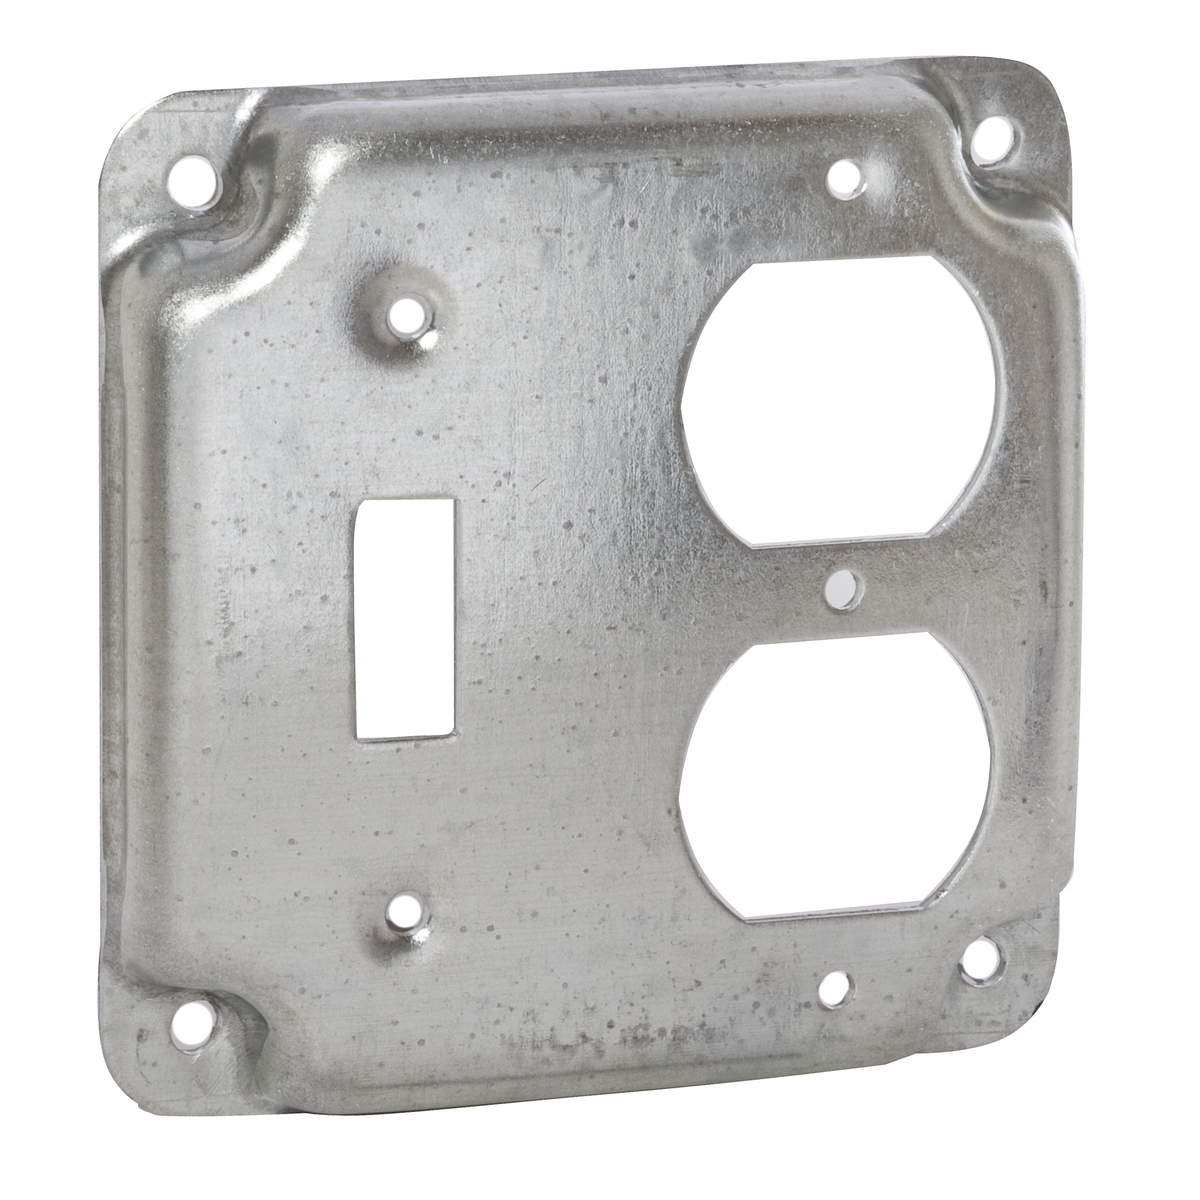 RACO 906C 4" SQUARE EXPOSED WORK COVER, 1 DUPLEX RECEPTACLE & TOGGLE SWITC